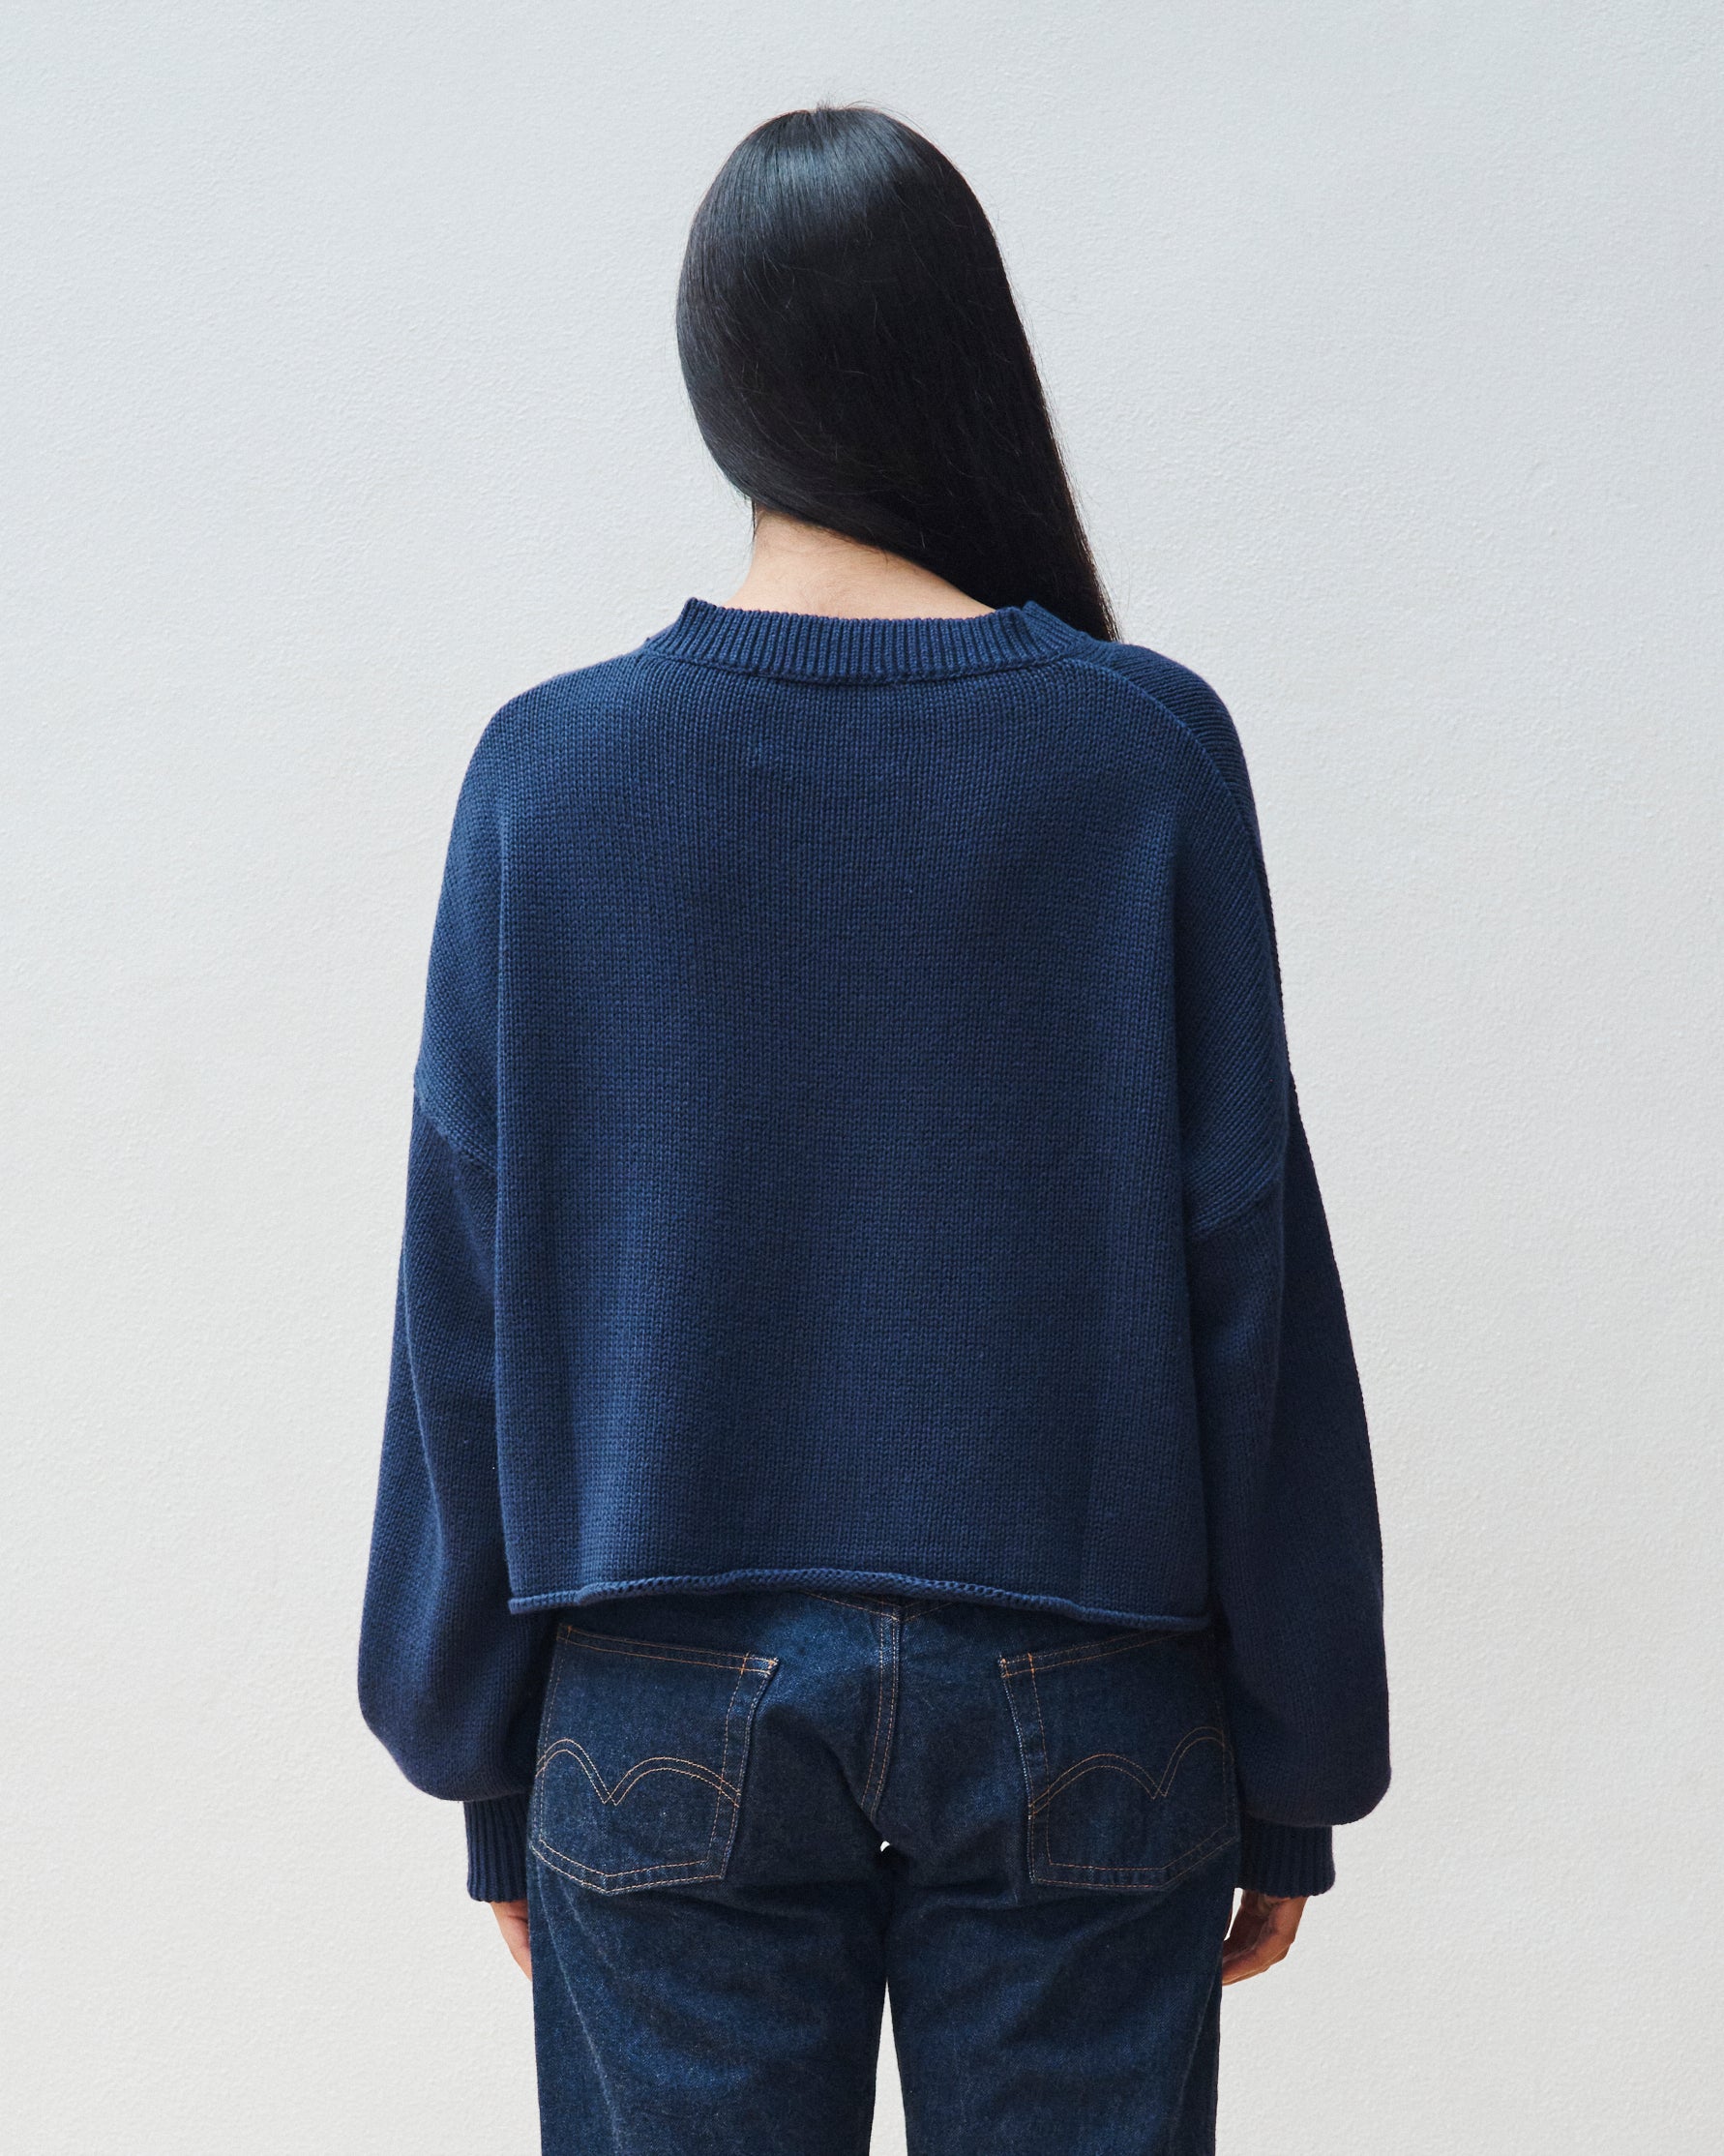 Cropped V-Neck Sweater in Navy